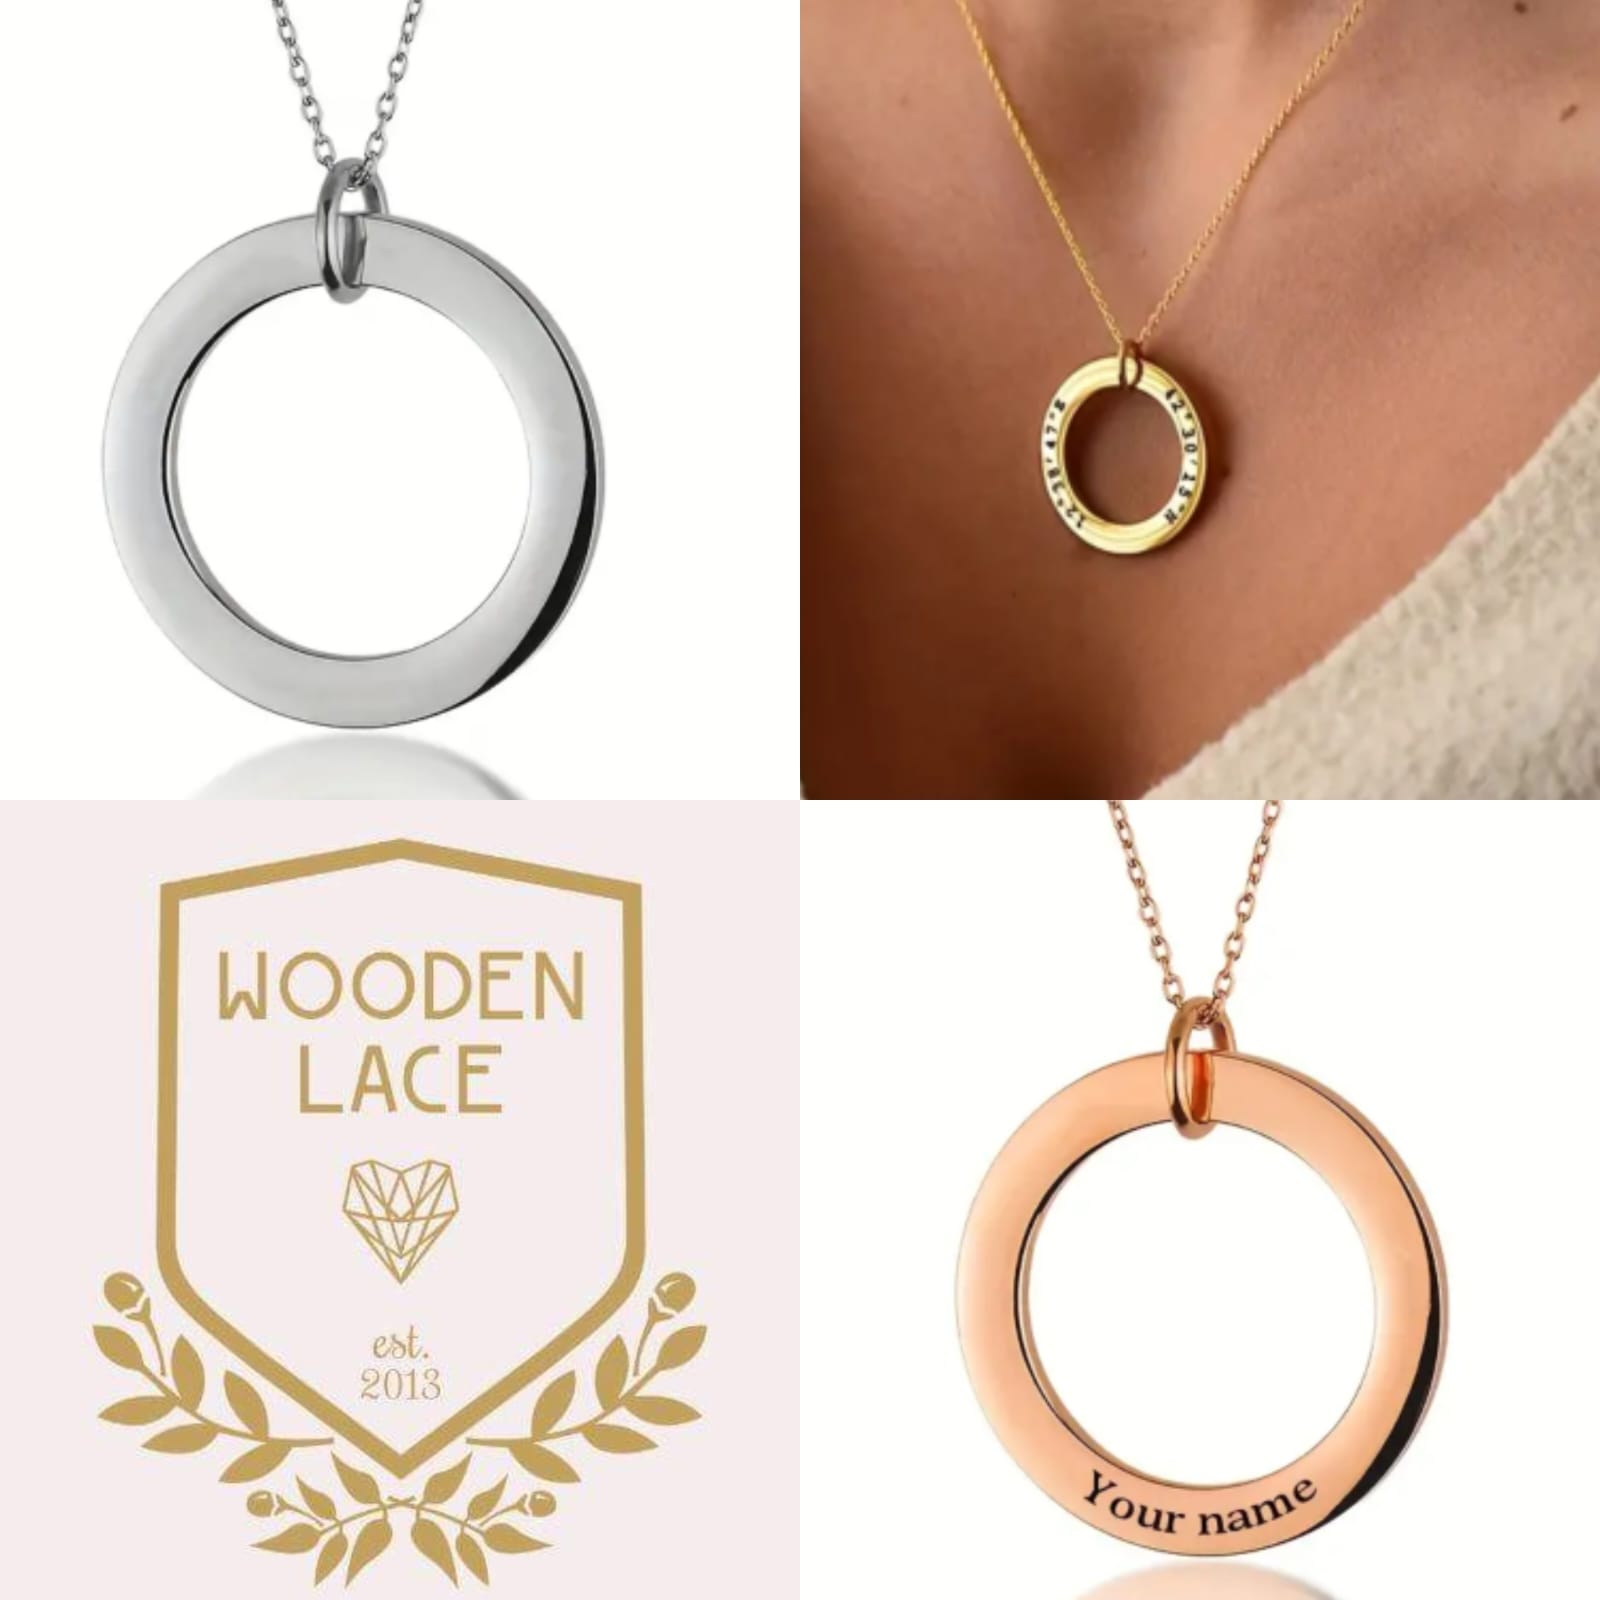 Washer pendant necklace with personilized engraving on. R750. Available in Gold silver and rosegold. Waterproof and tarnish-proof.